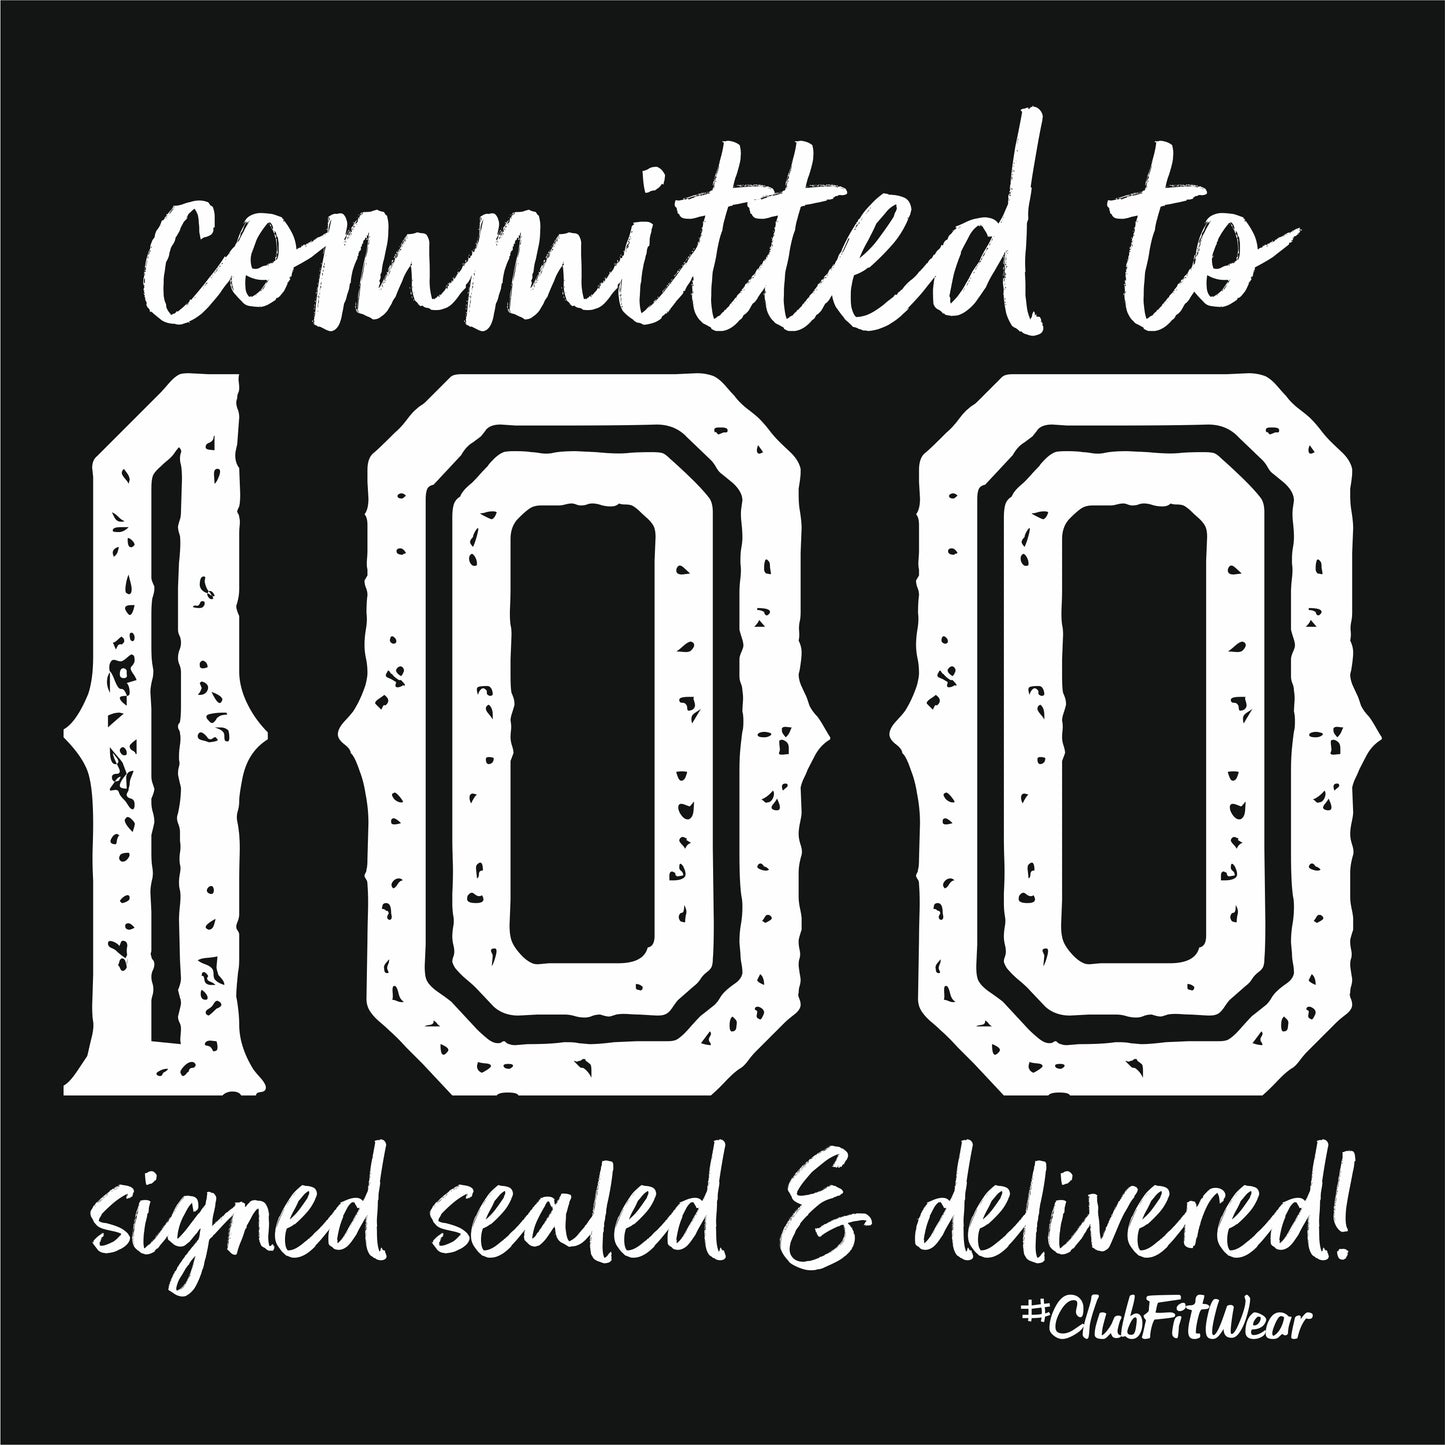 MM100 Signed Sealed & Delivered - Committed to 100